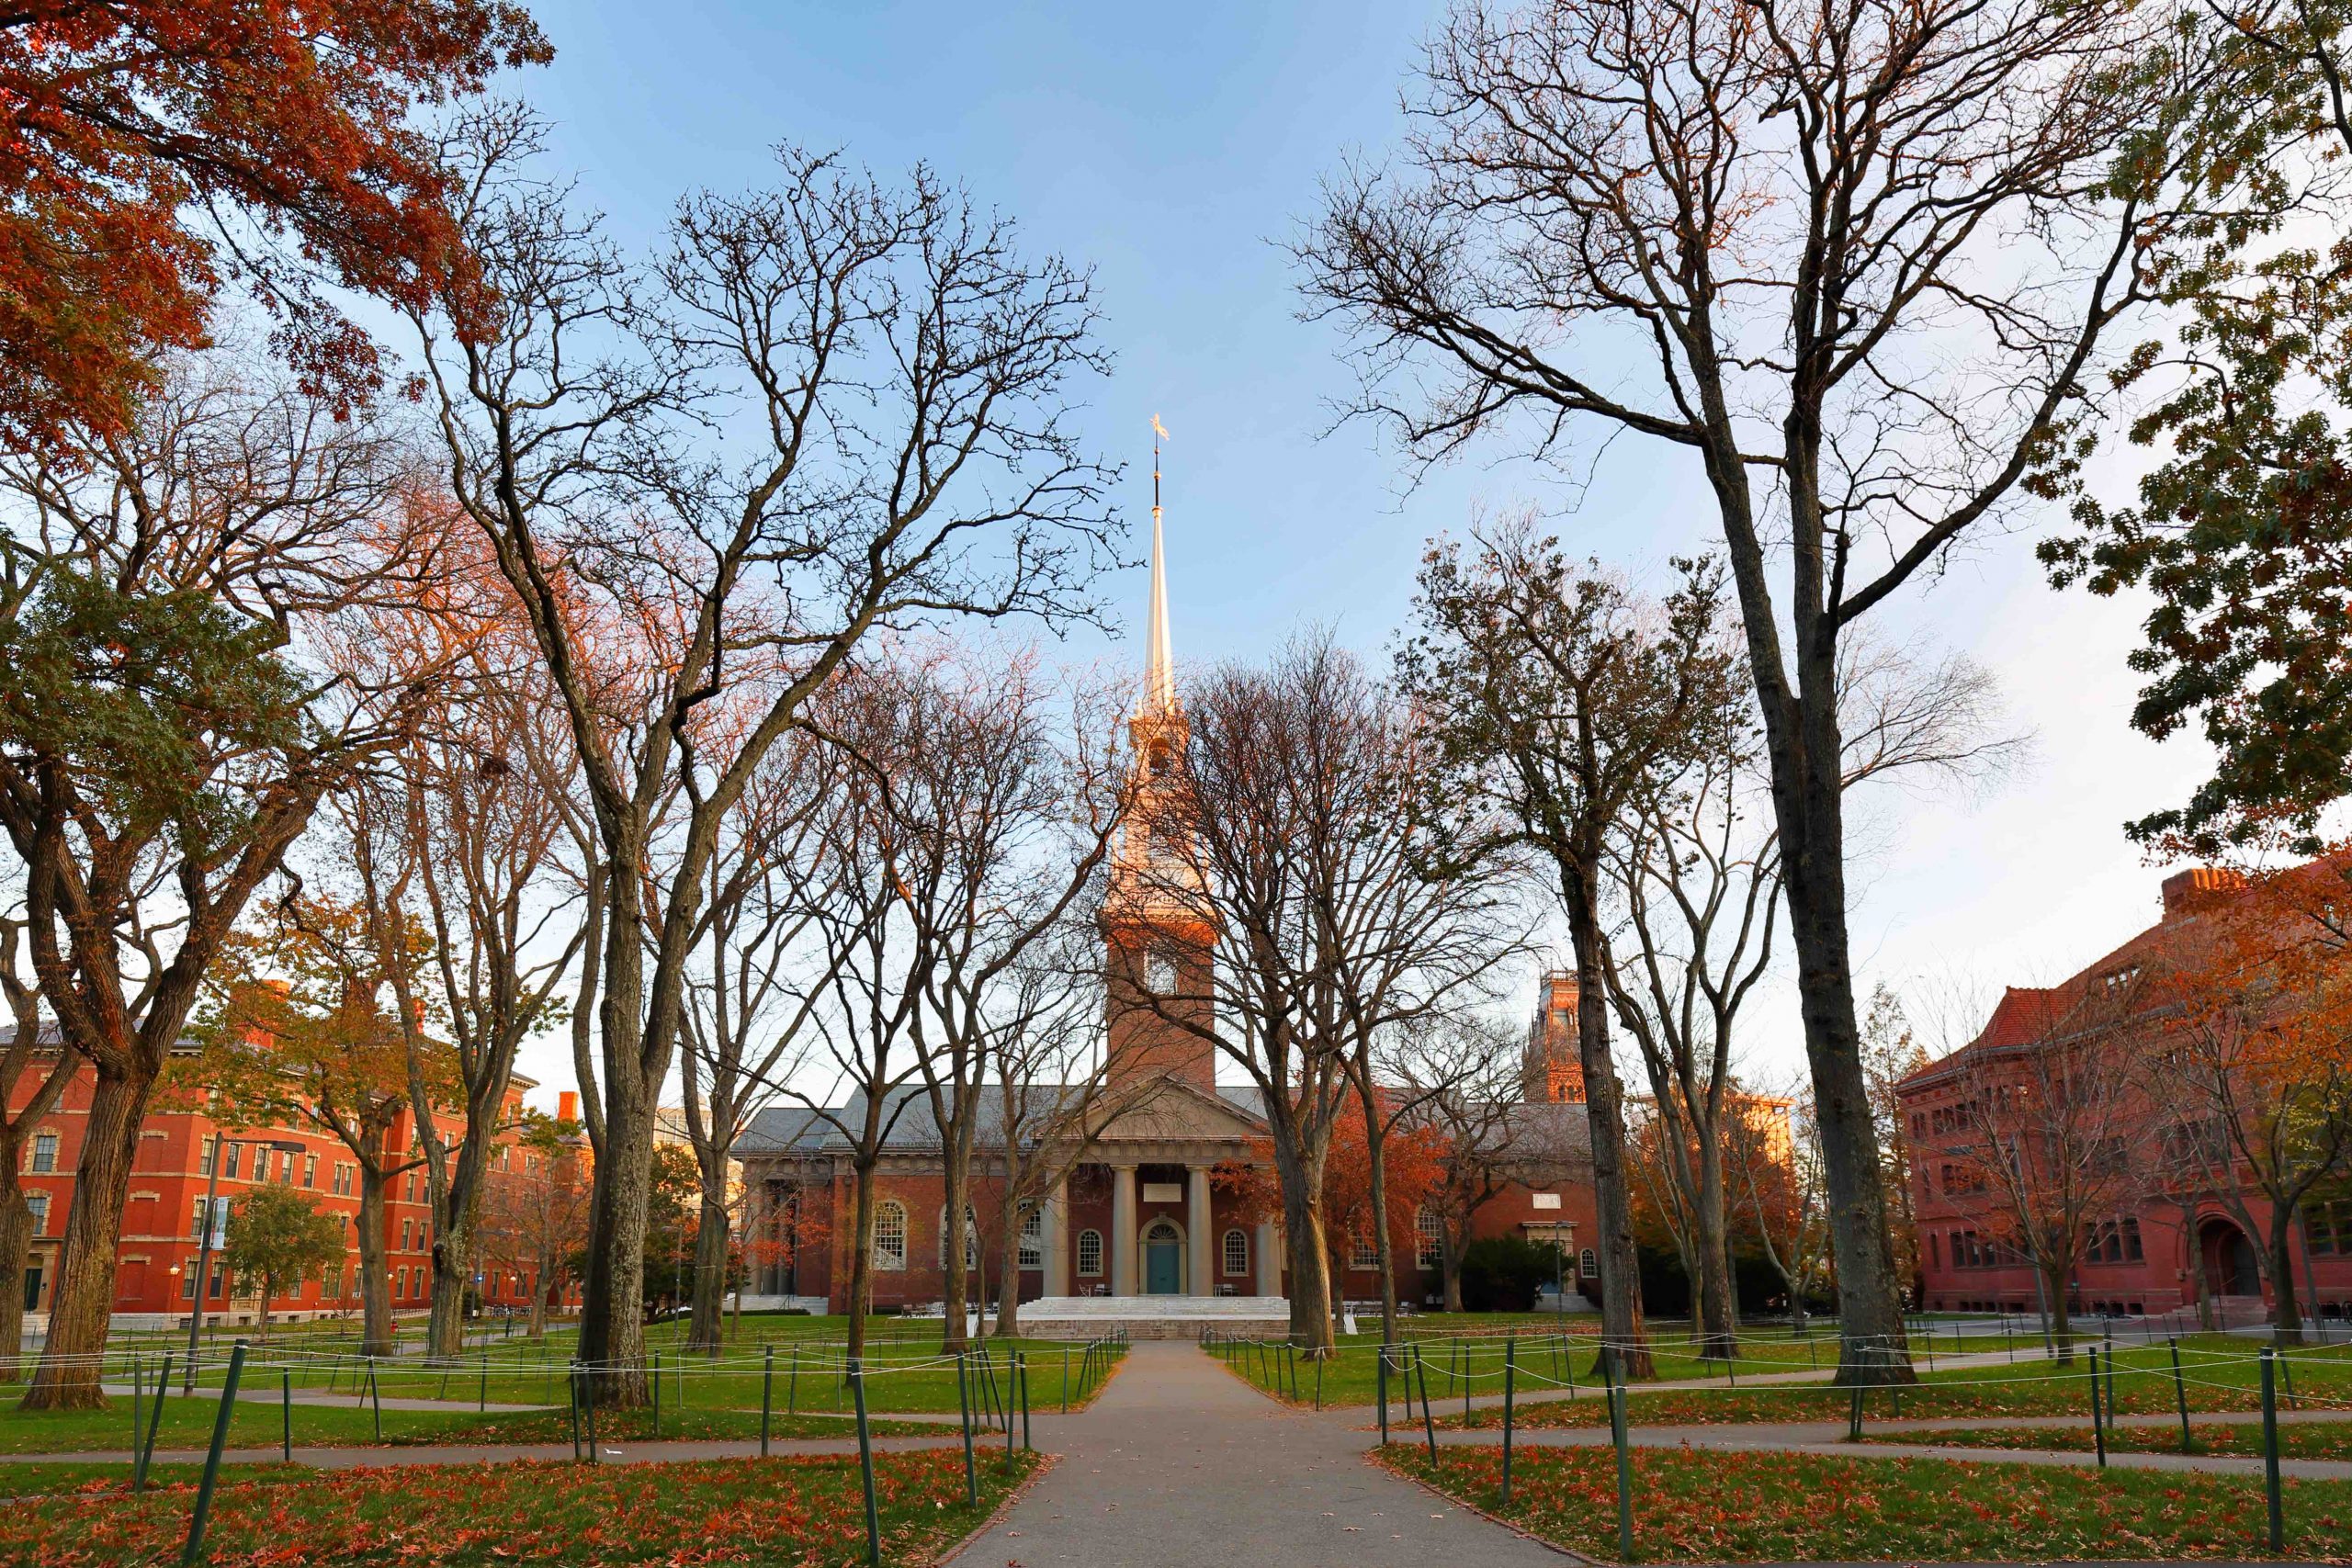 Church and trees in fall on college campus